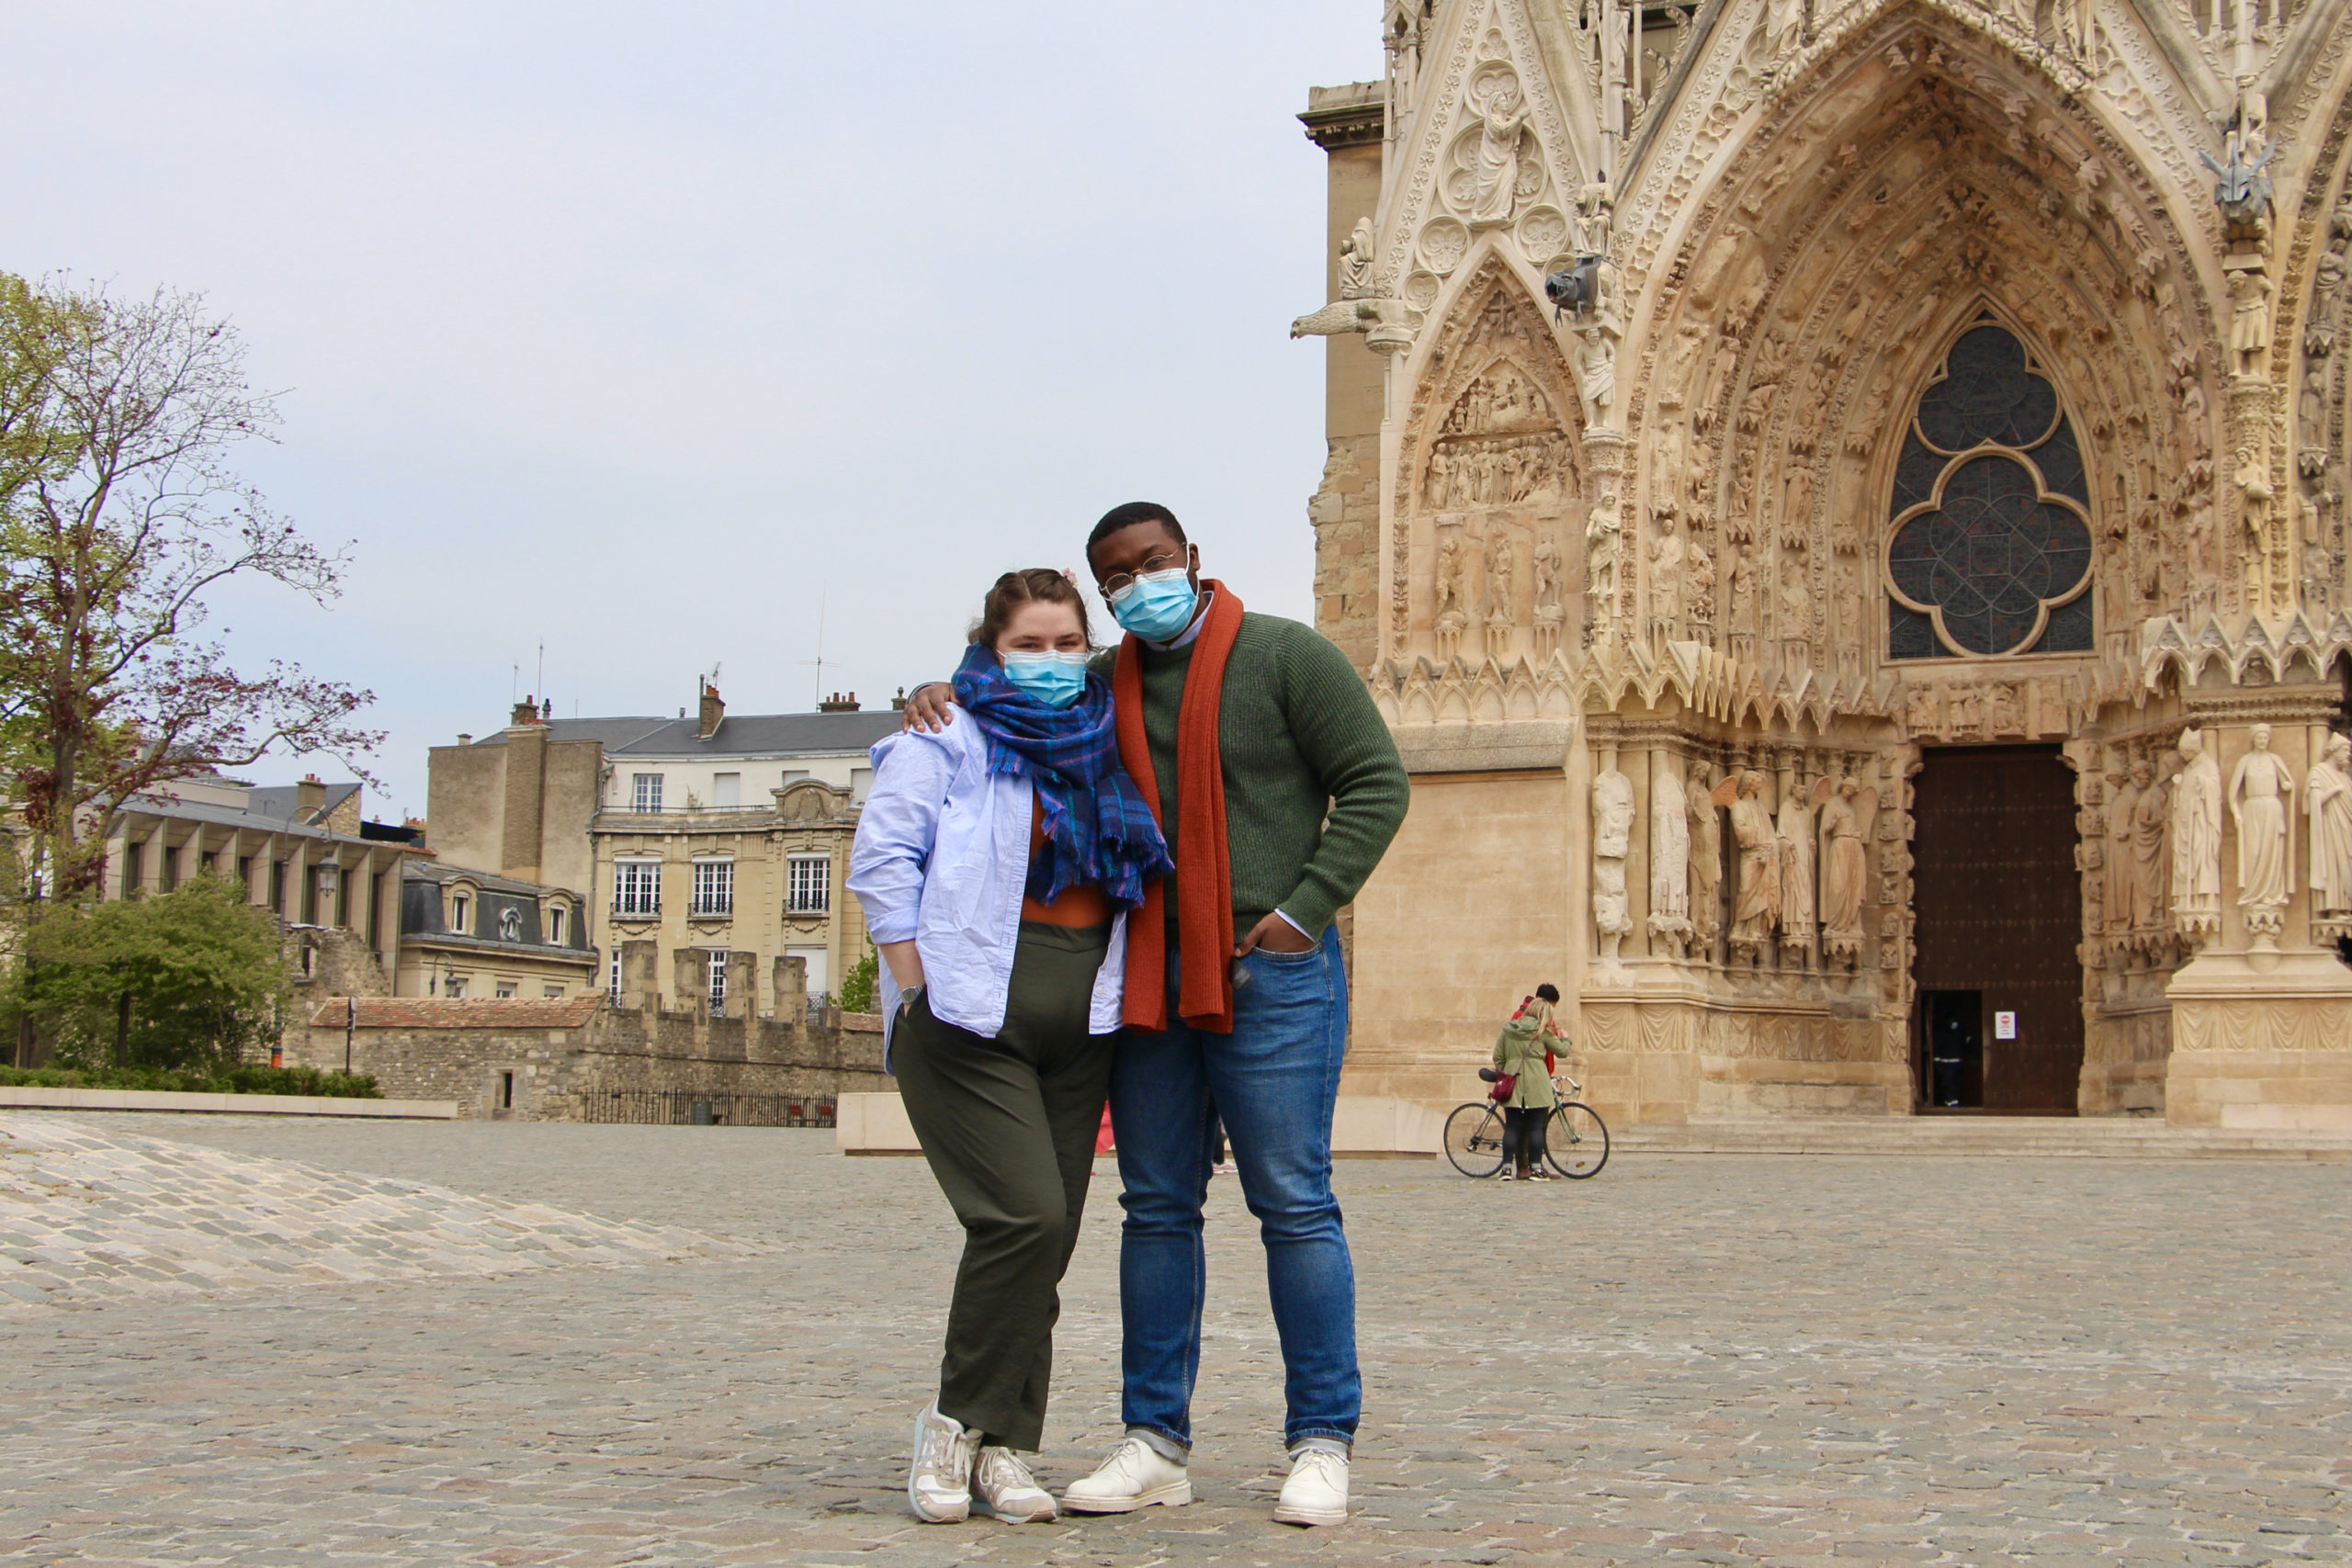 Maria and Jalen stand together in front of the cathedral in Reims, France.